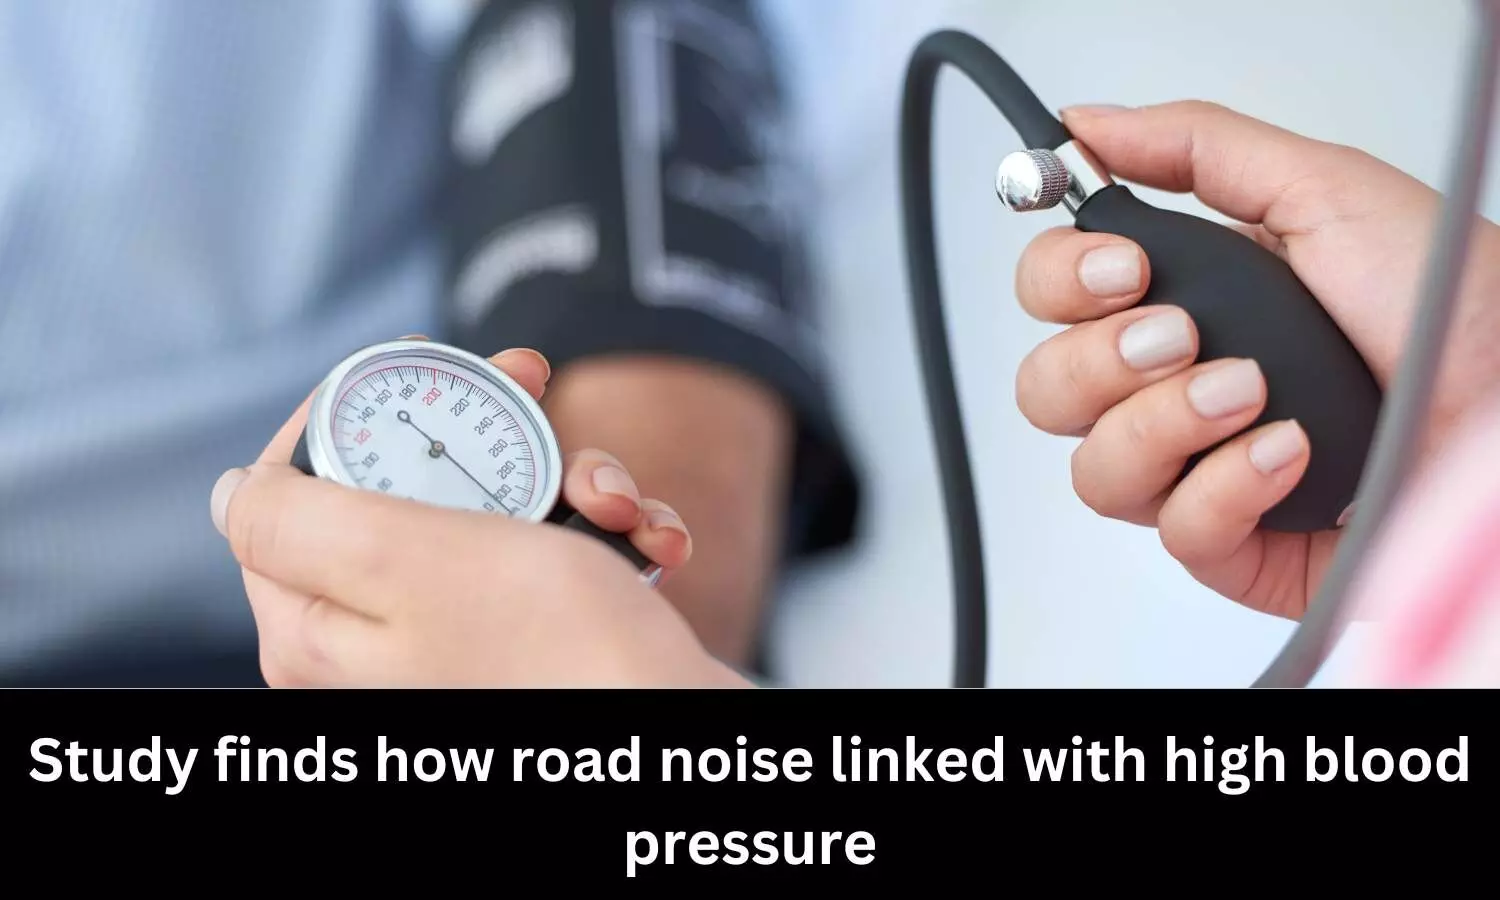 Study finds how road noise linked with high blood pressure